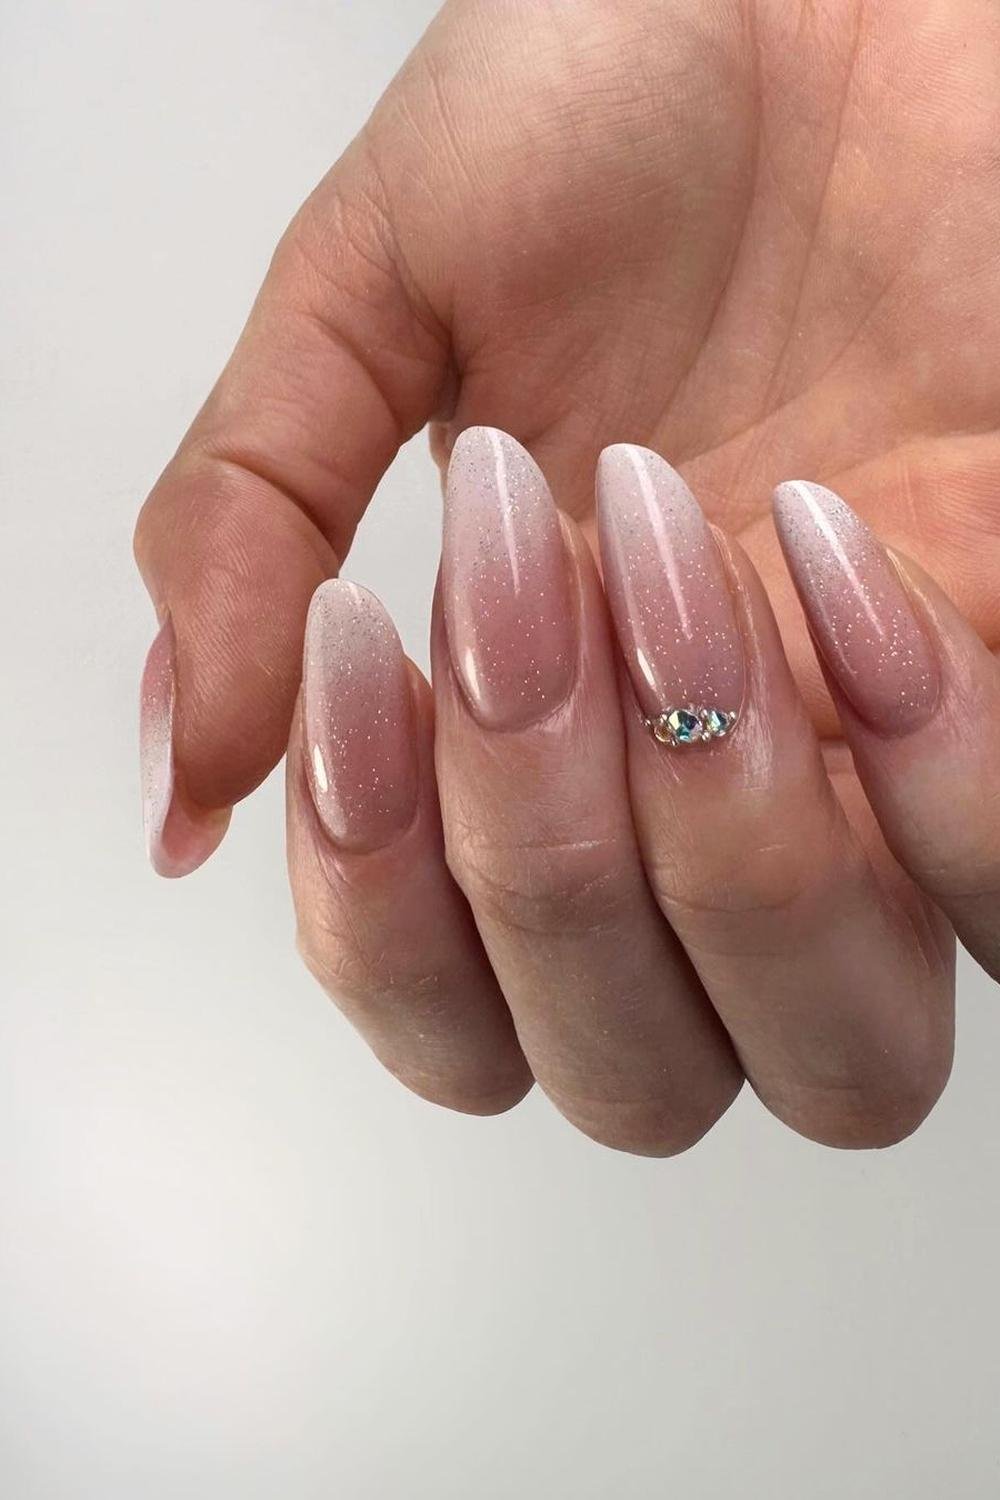 6 - Picture of Baby Boomer Nails